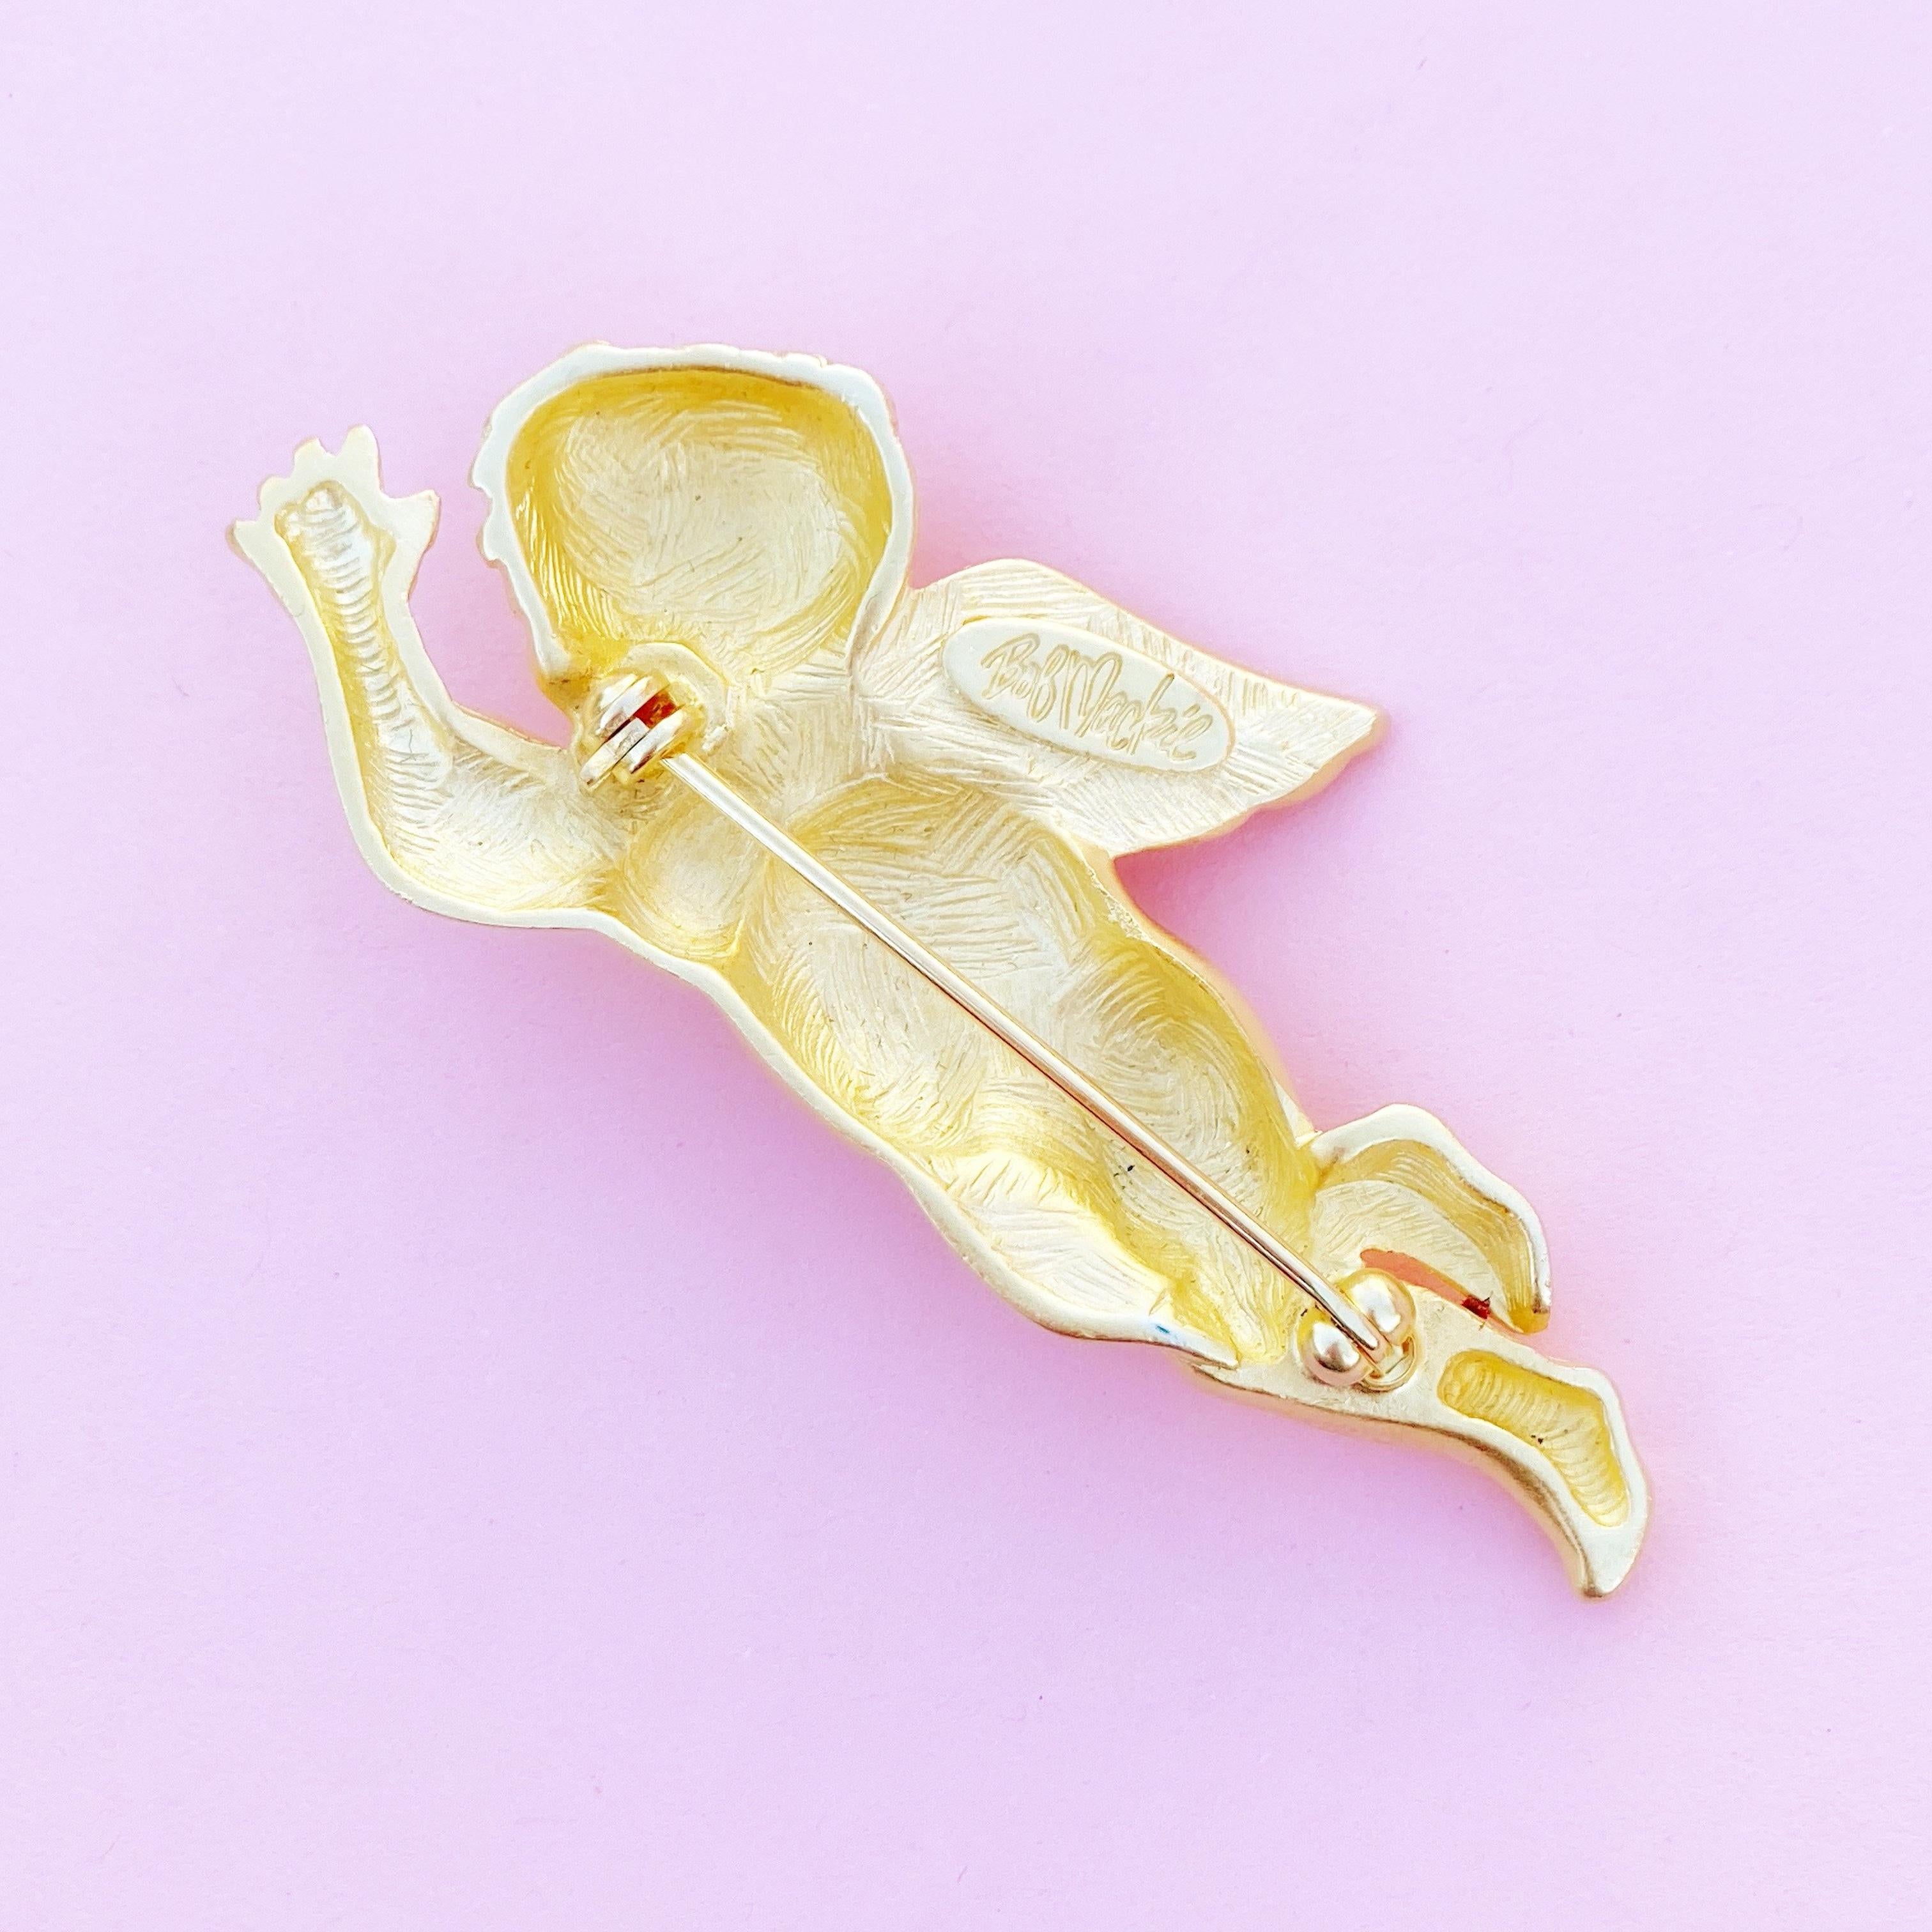 Vintage Gilded Cherub Figural Brooch by Bob Mackie, 1980s In Excellent Condition For Sale In McKinney, TX